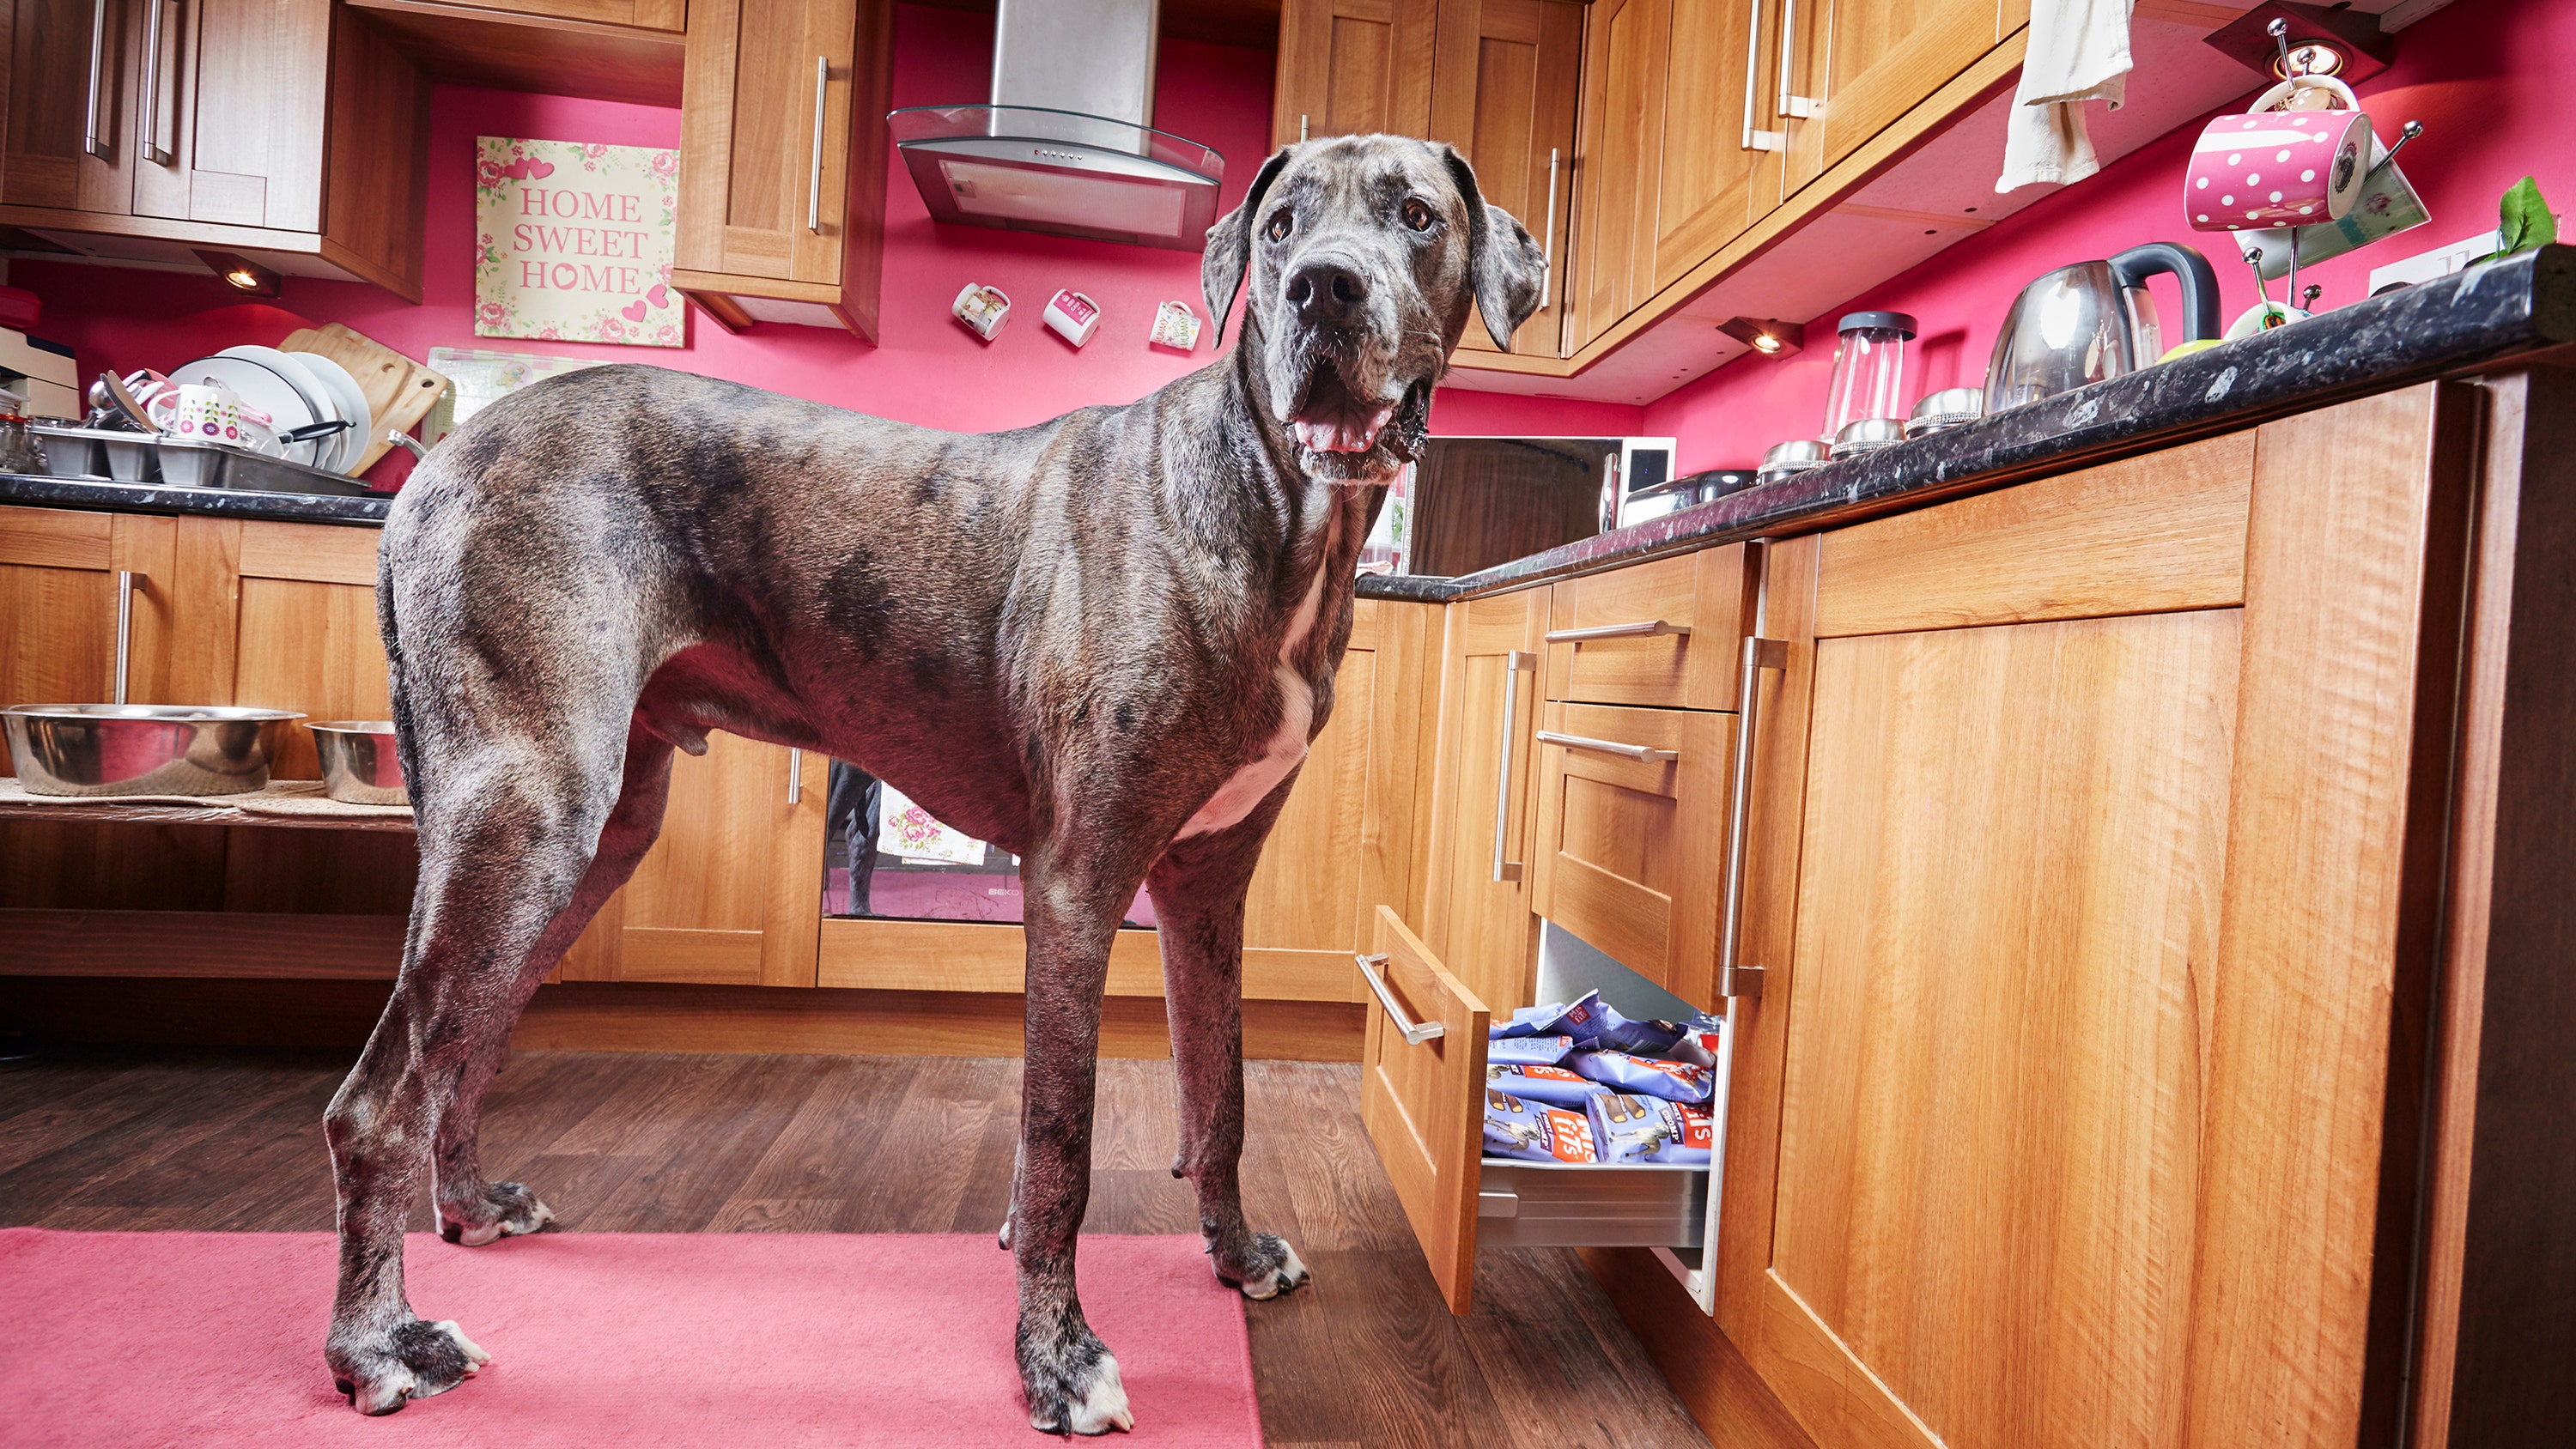 The tallest dog in the world, the Great Dane, 8 years old, dies